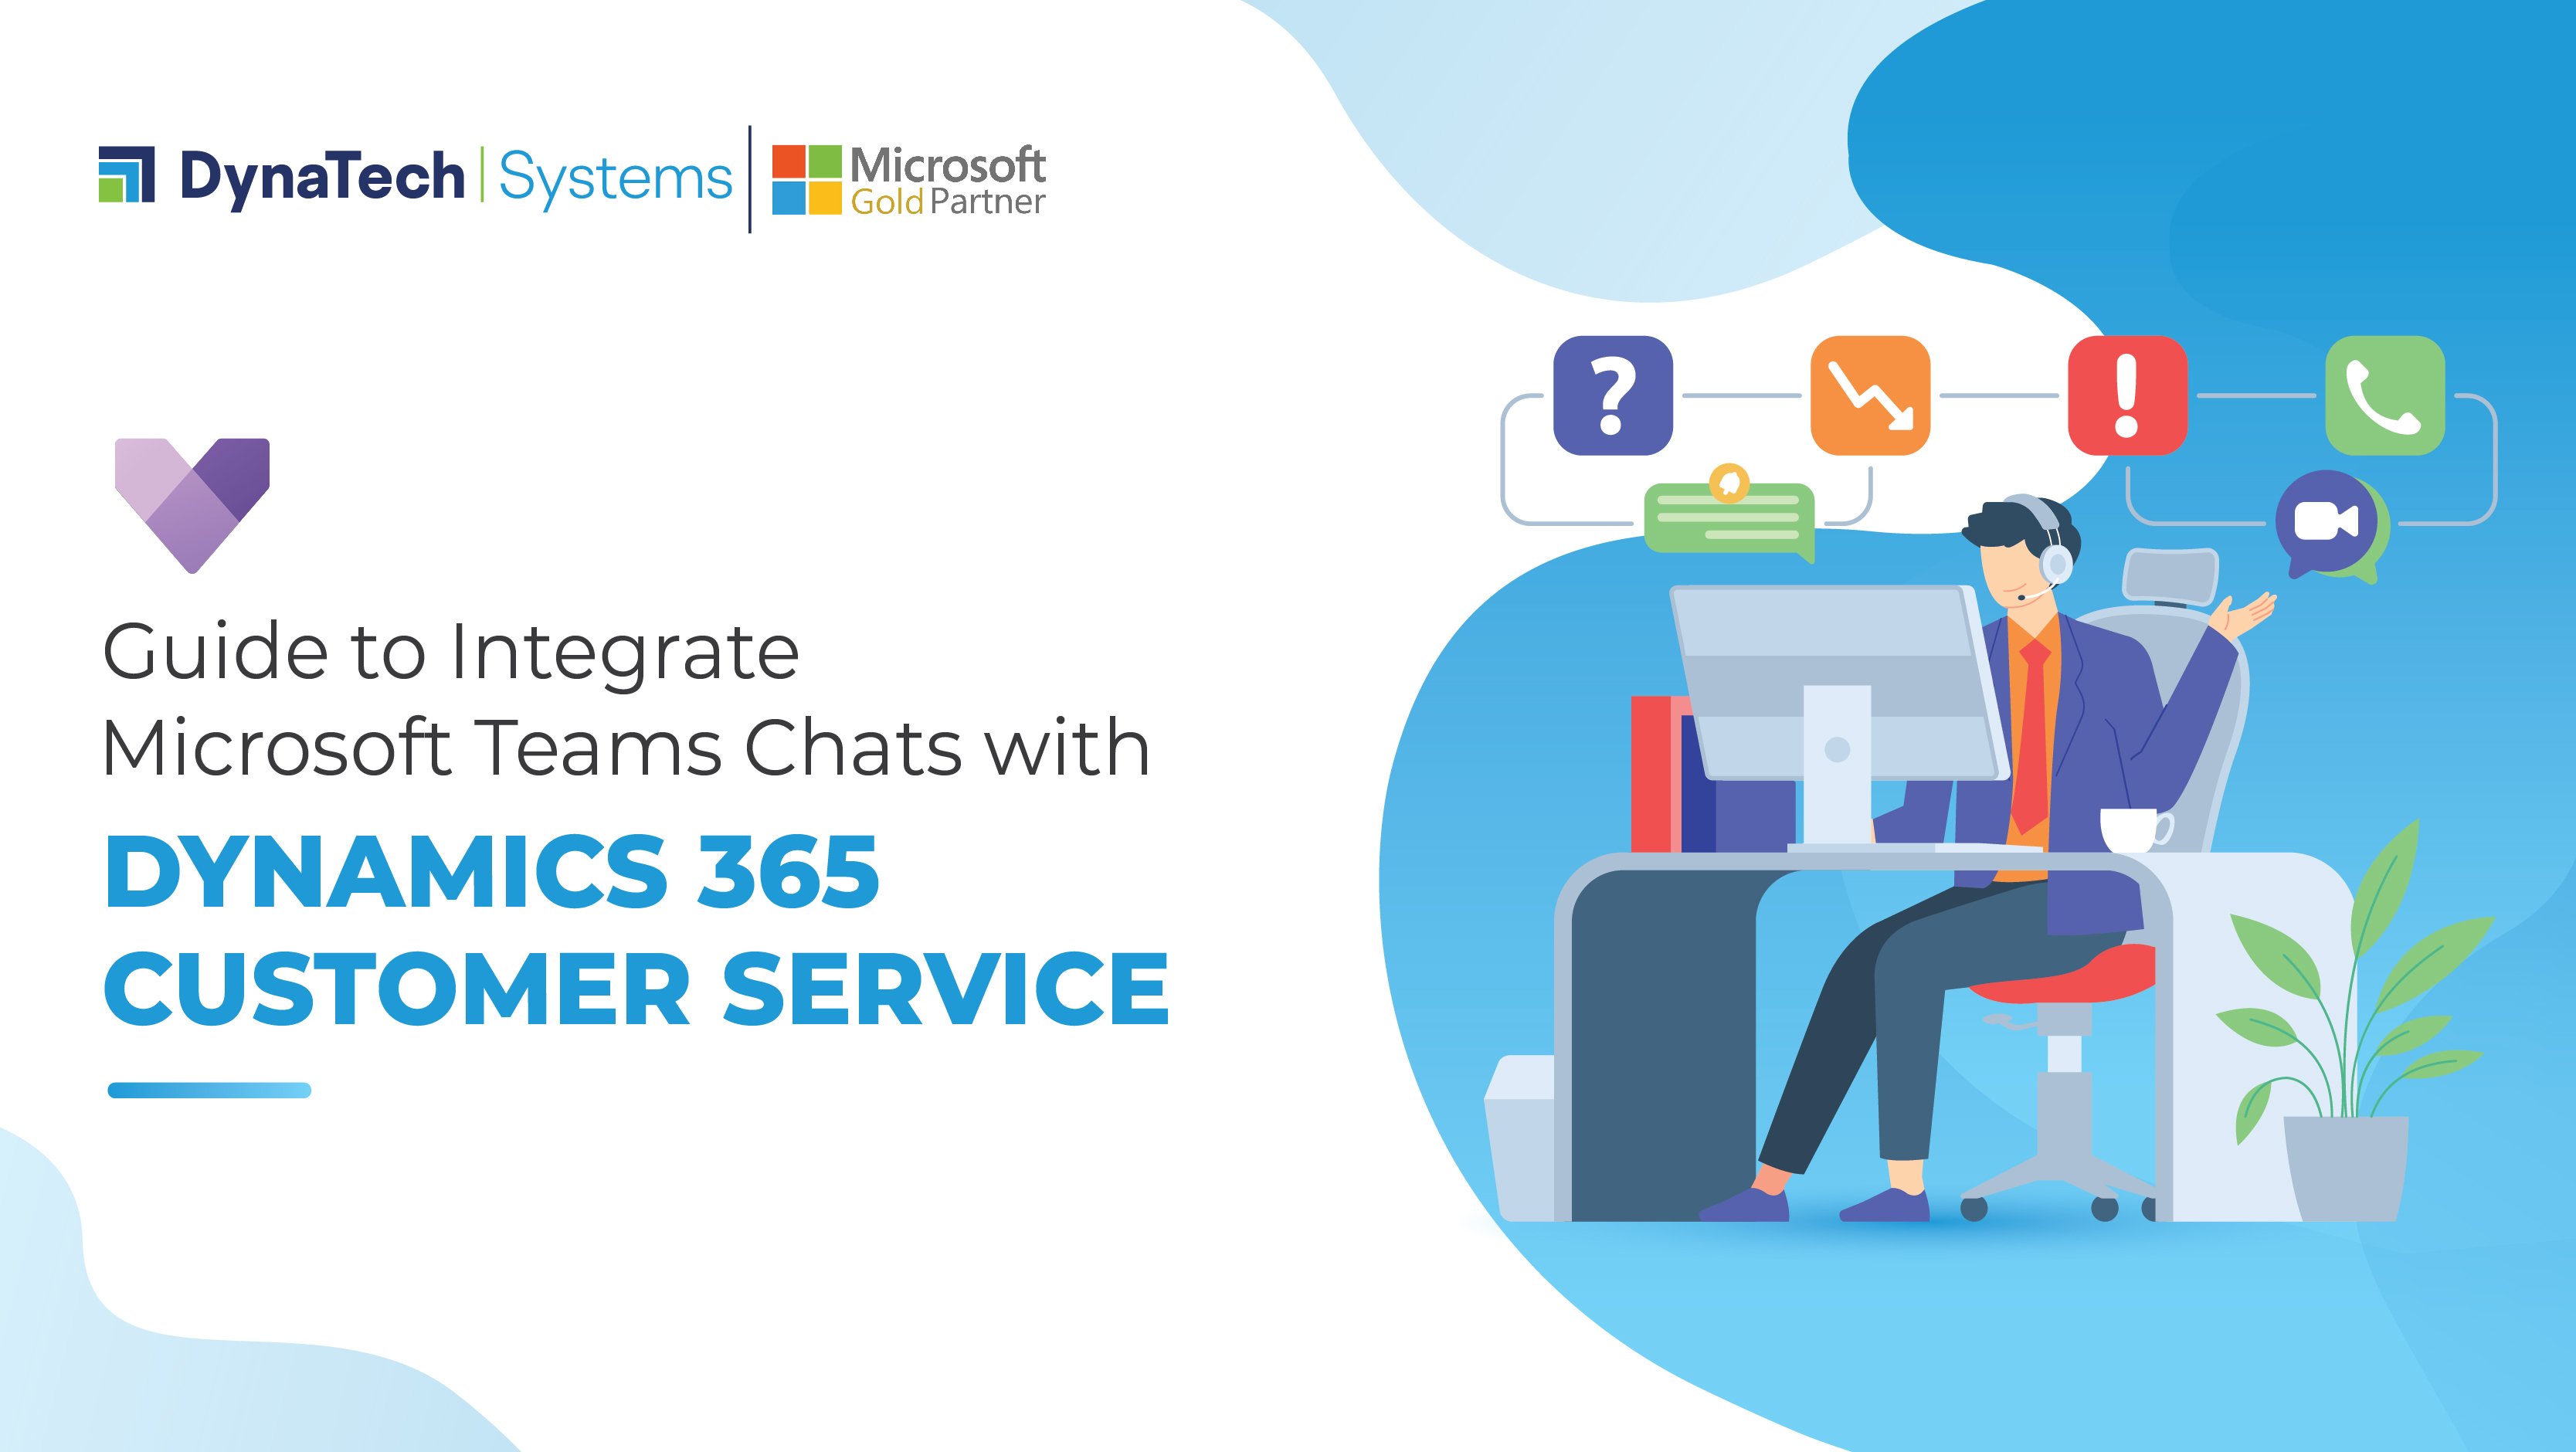 Guide to Integrate Microsoft Teams Chats with Dynamics 365 Customer Service